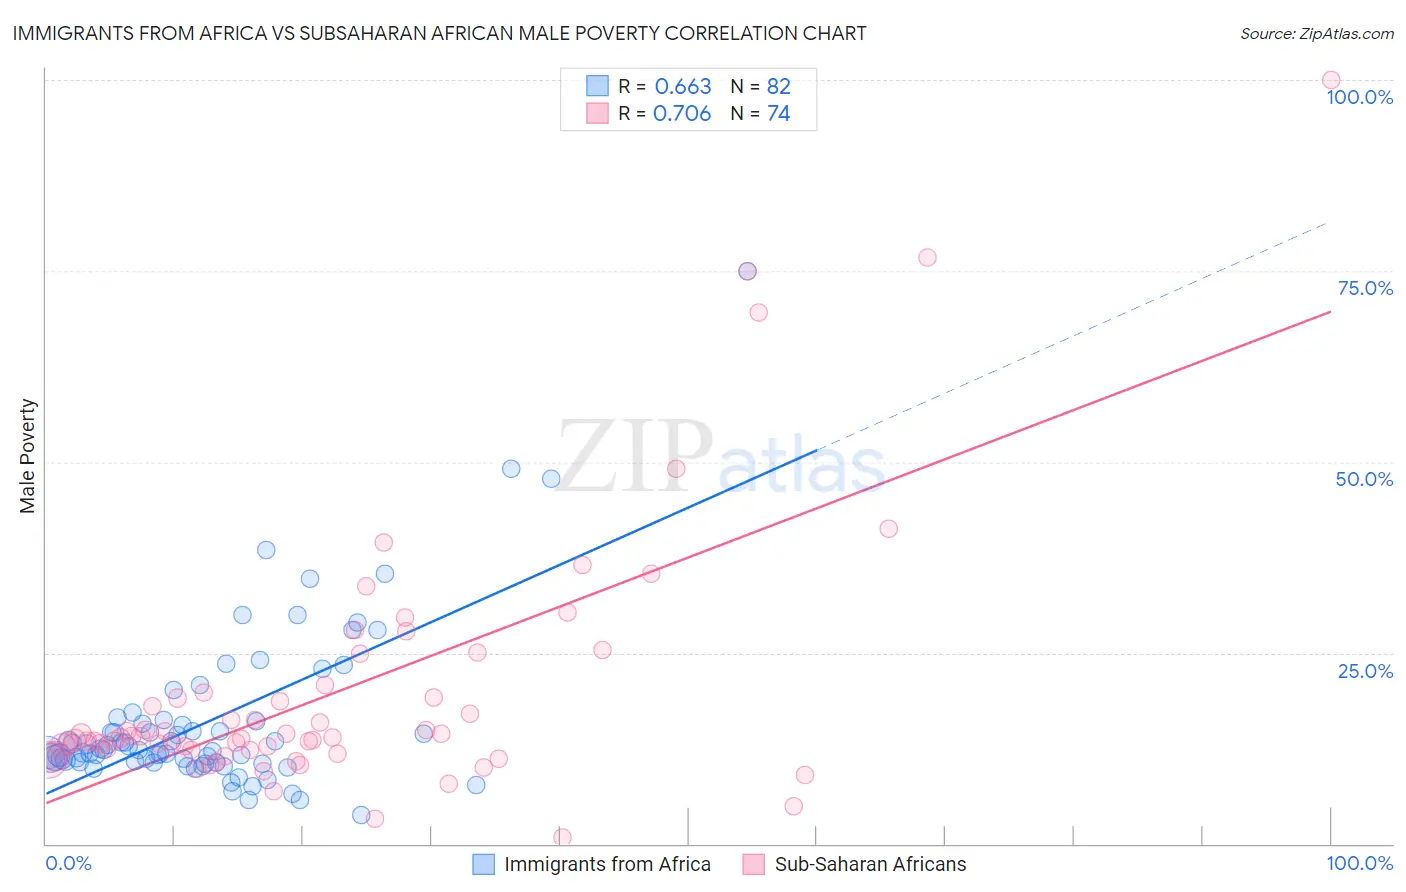 Immigrants from Africa vs Subsaharan African Male Poverty